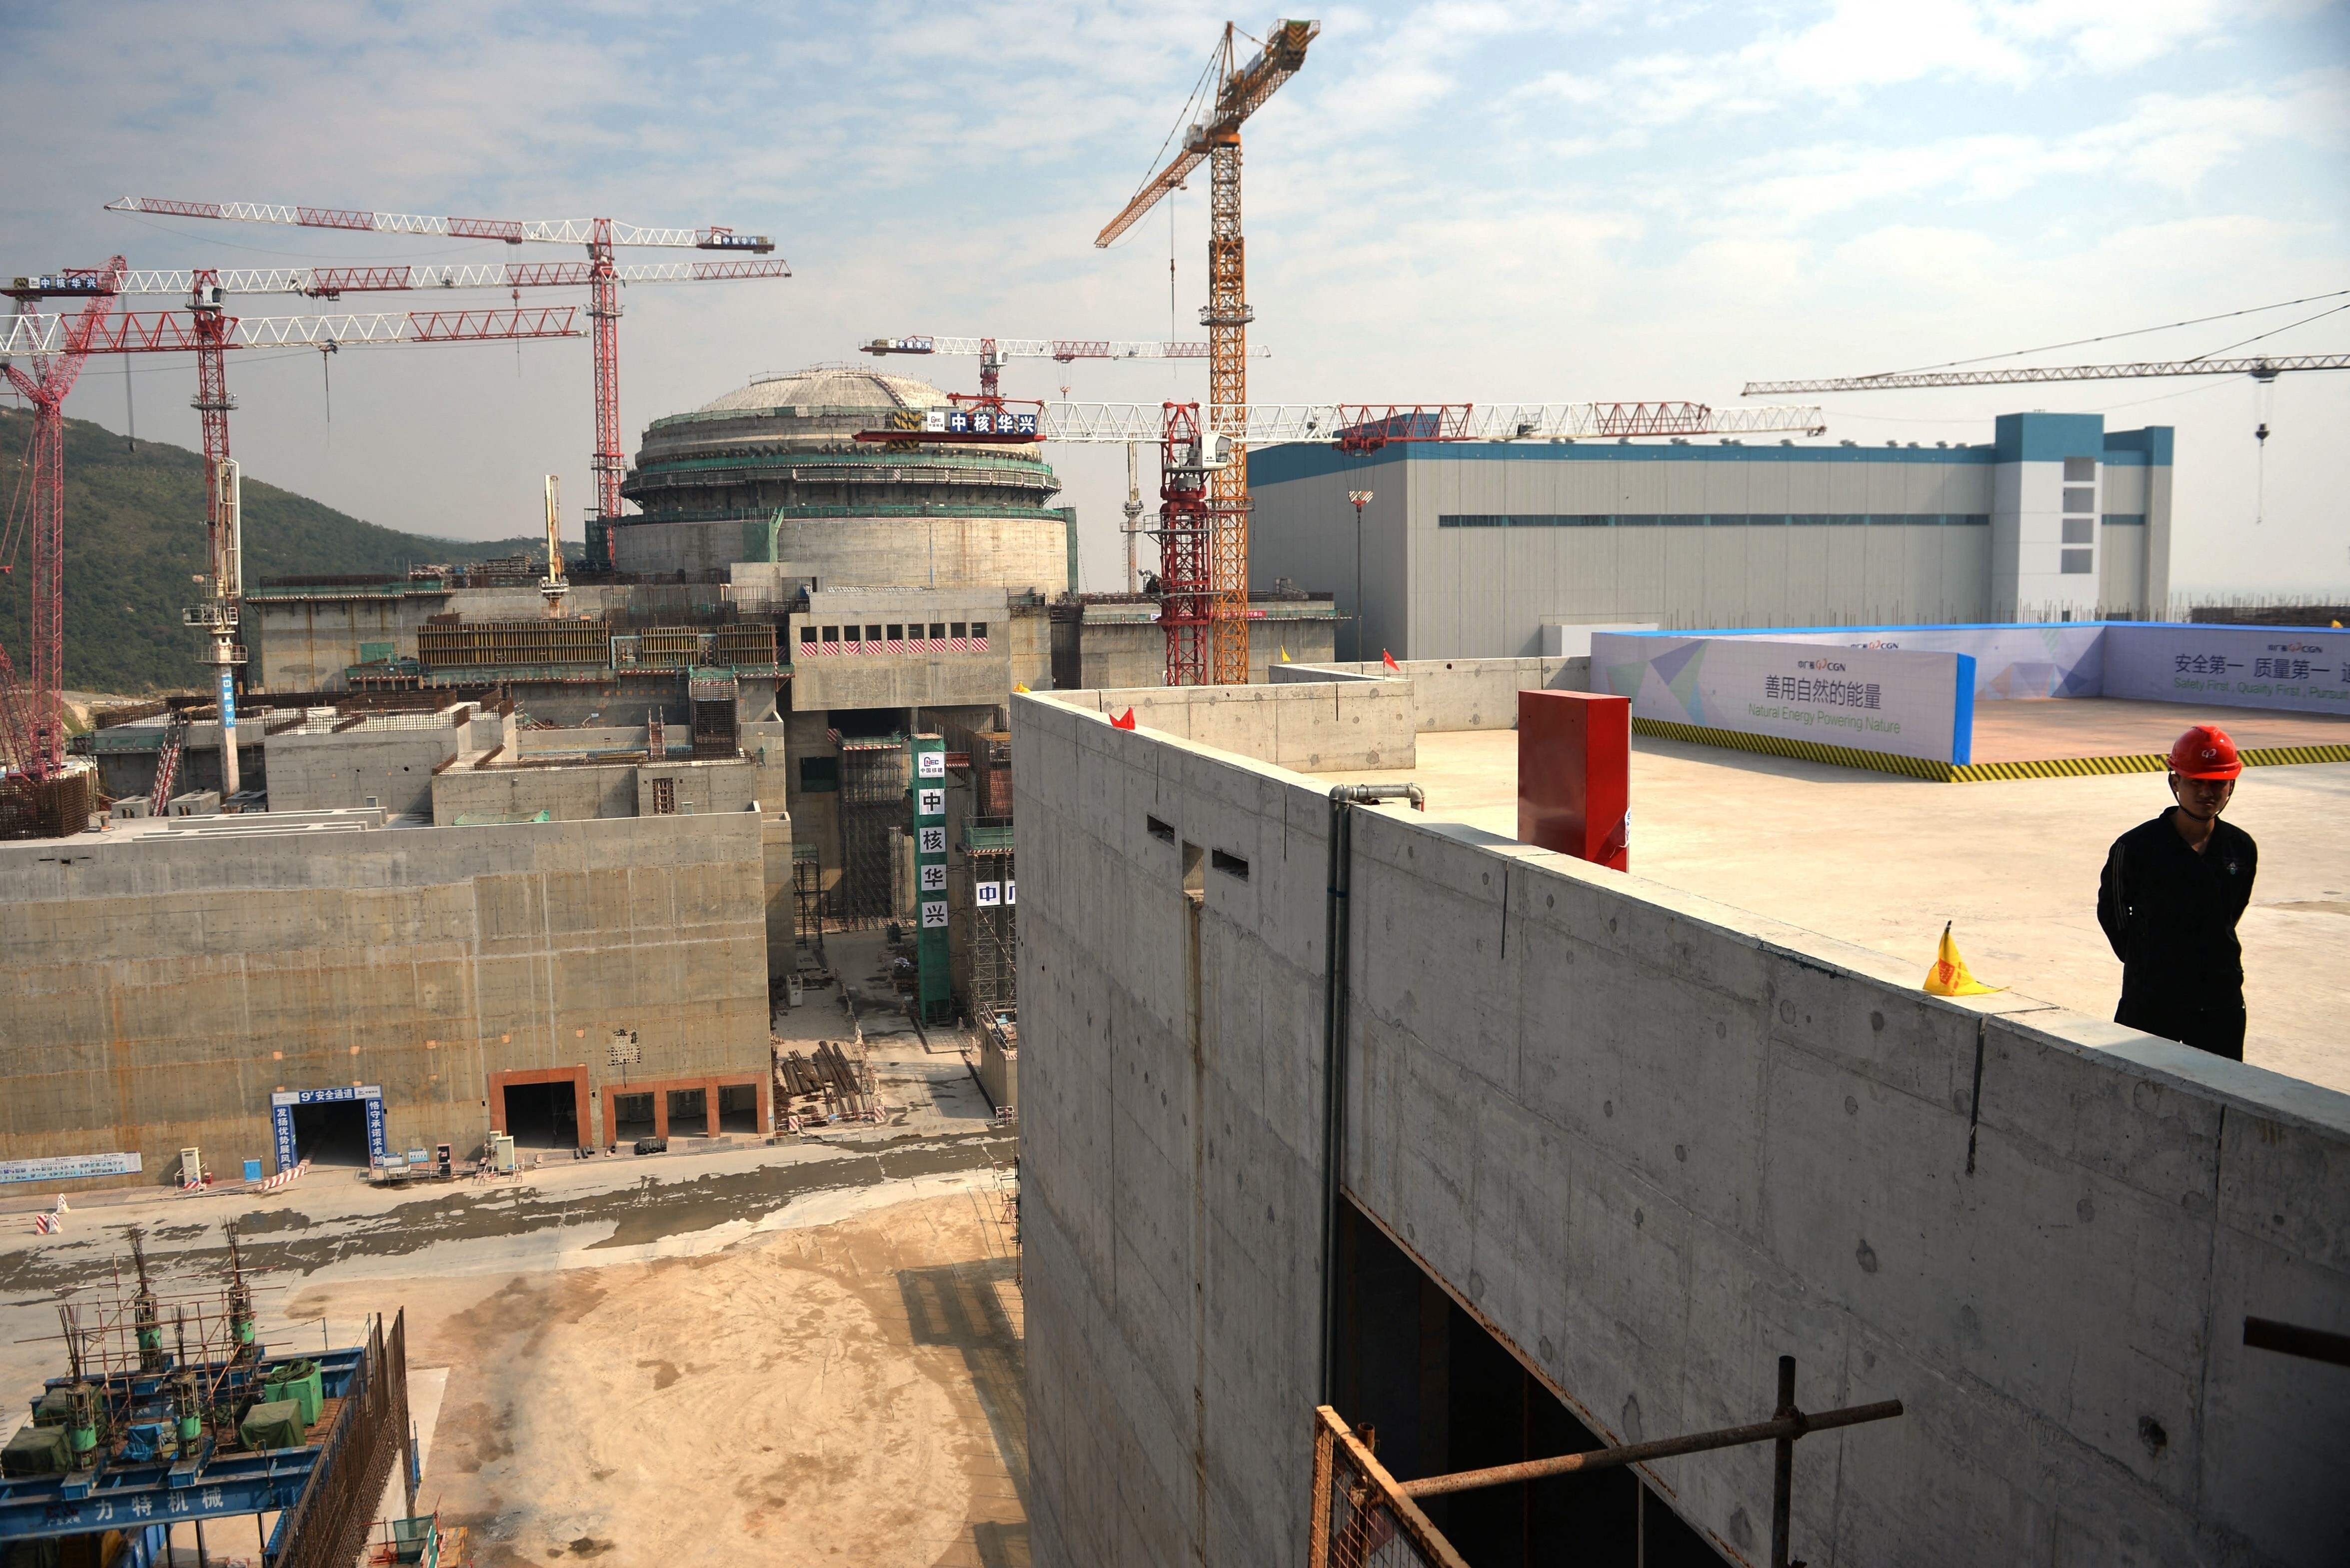 The Taishan plant under construction in 2013. It is the first in the world to use a reactor design meant to be safer and more efficient than previous technology. Photo: AFP